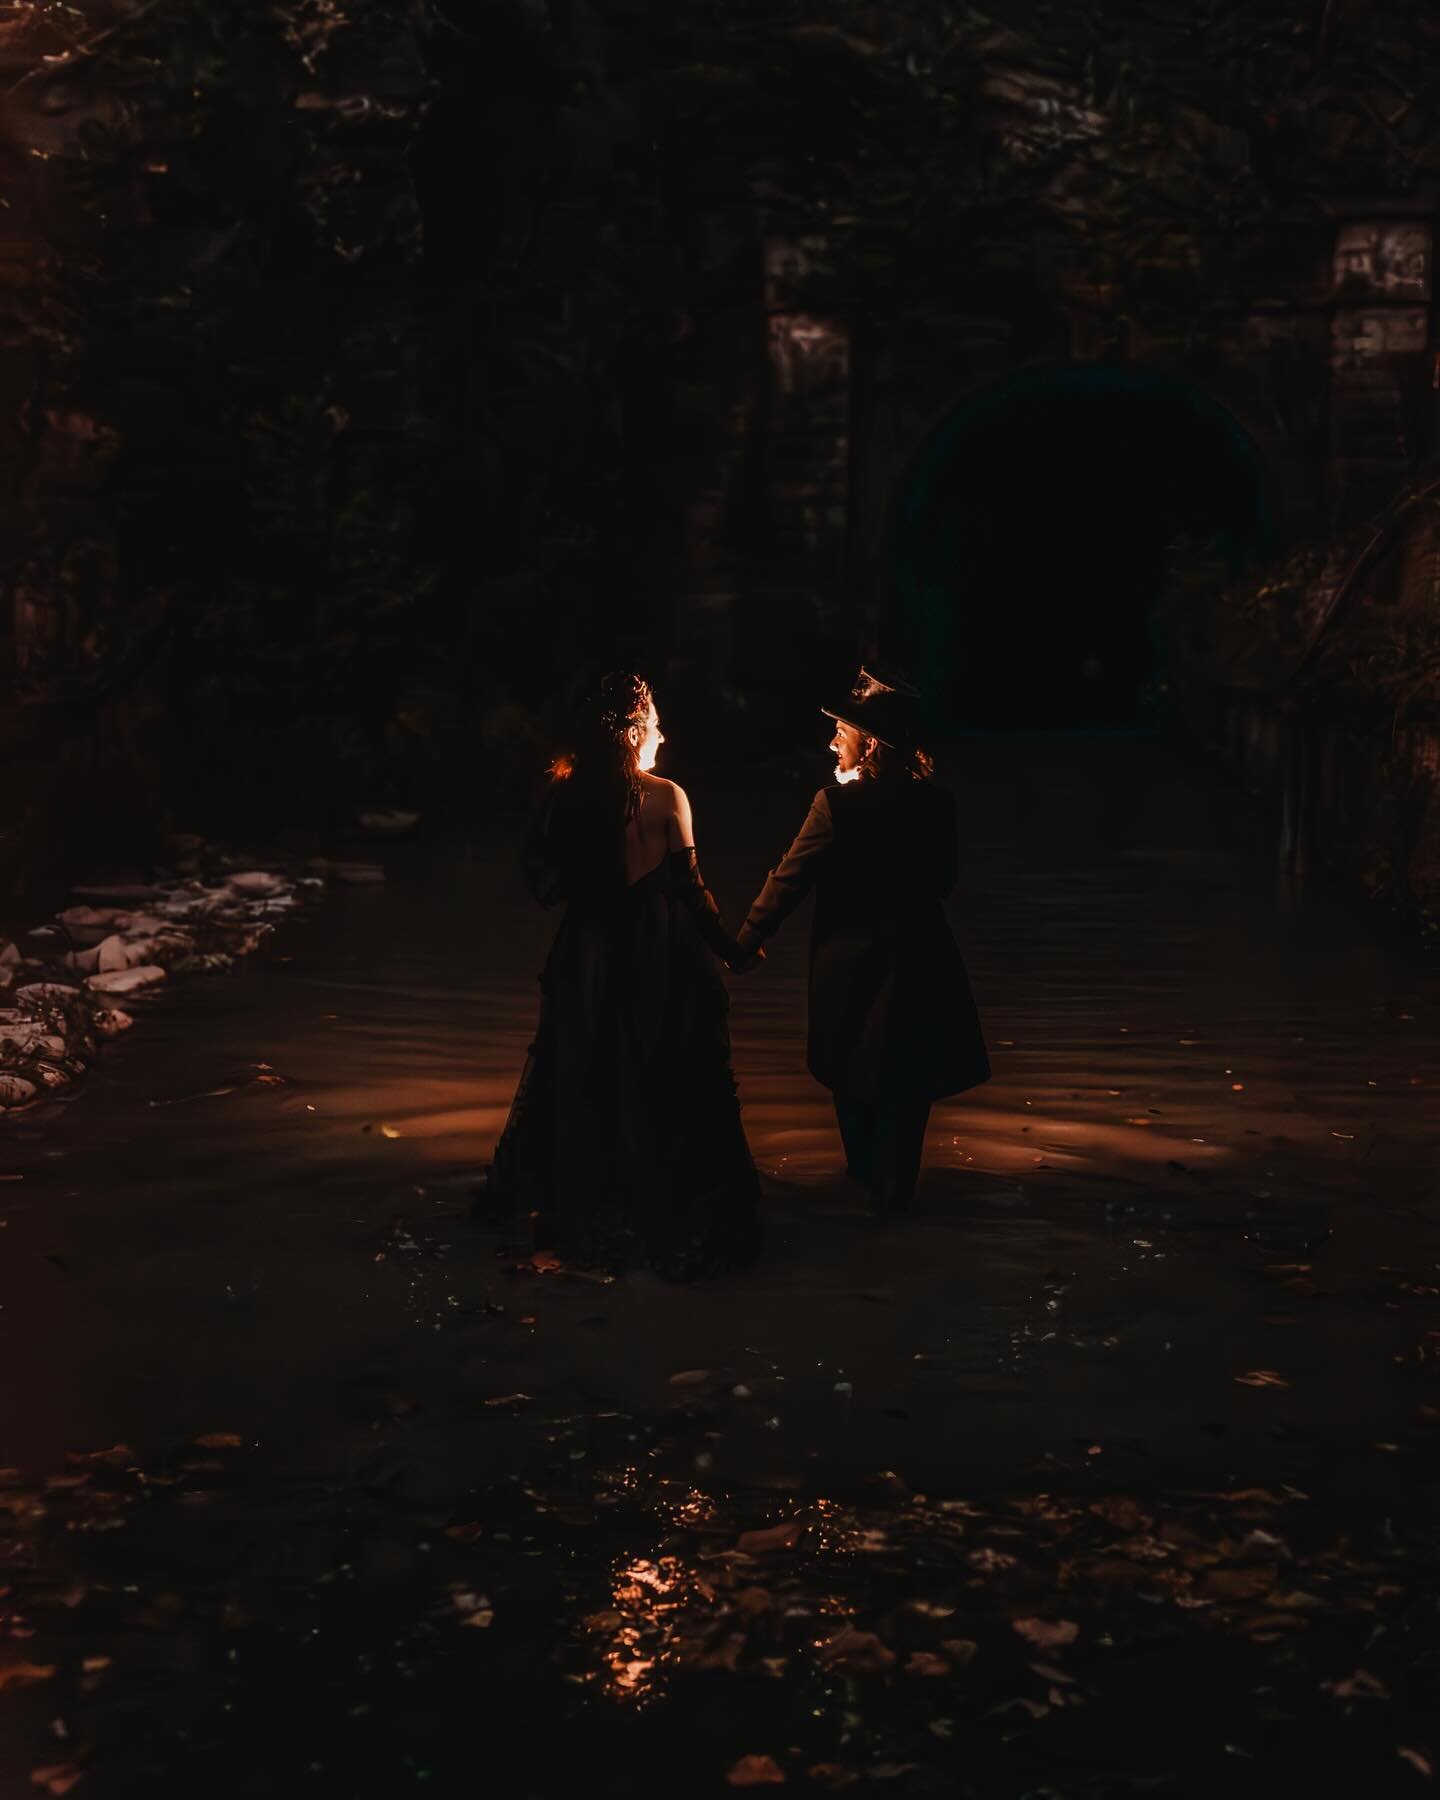 Rebekah and Nova landed on the idea of a Friday the 13th Elopement at the Paw Paw Tunnel on the C&amp;O Canal in Oldtown, Maryland and they proceeded to go all out. 
This Victorian Era and spooky inspired elopement featured lanterns, top hats, spooky